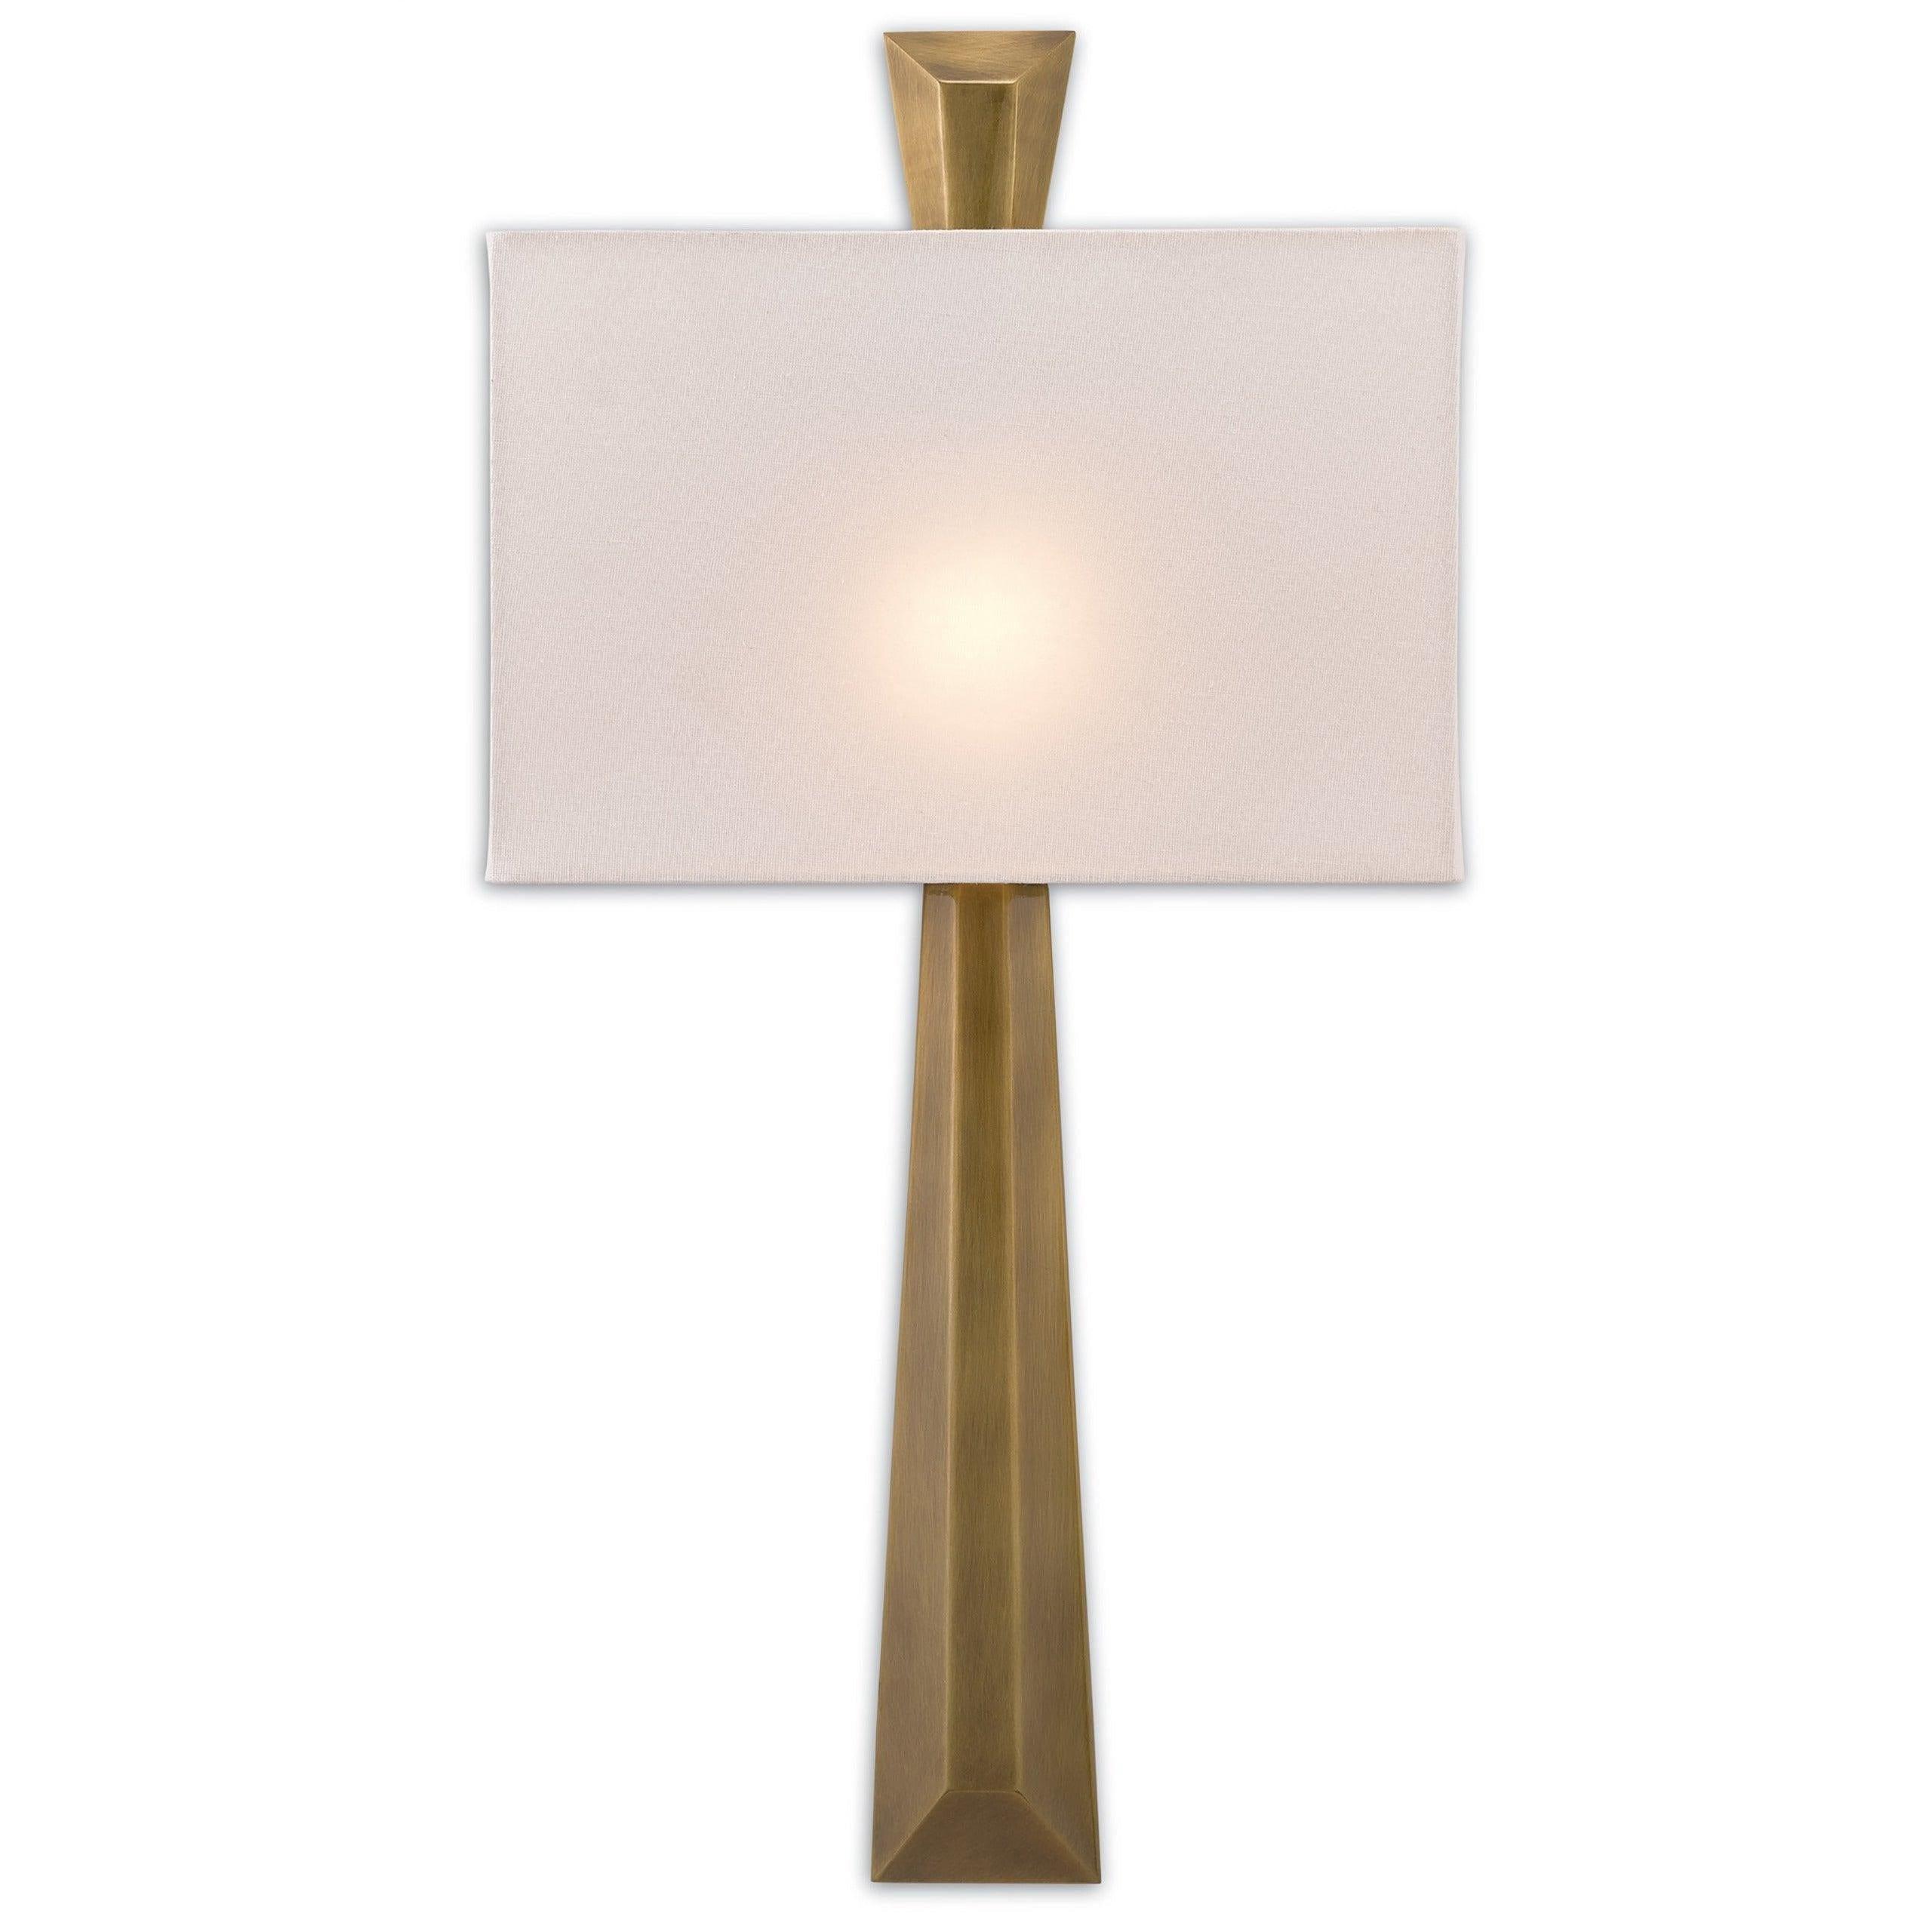 Currey and Company - Arno Wall Sconce - 5900-0016 | Montreal Lighting & Hardware